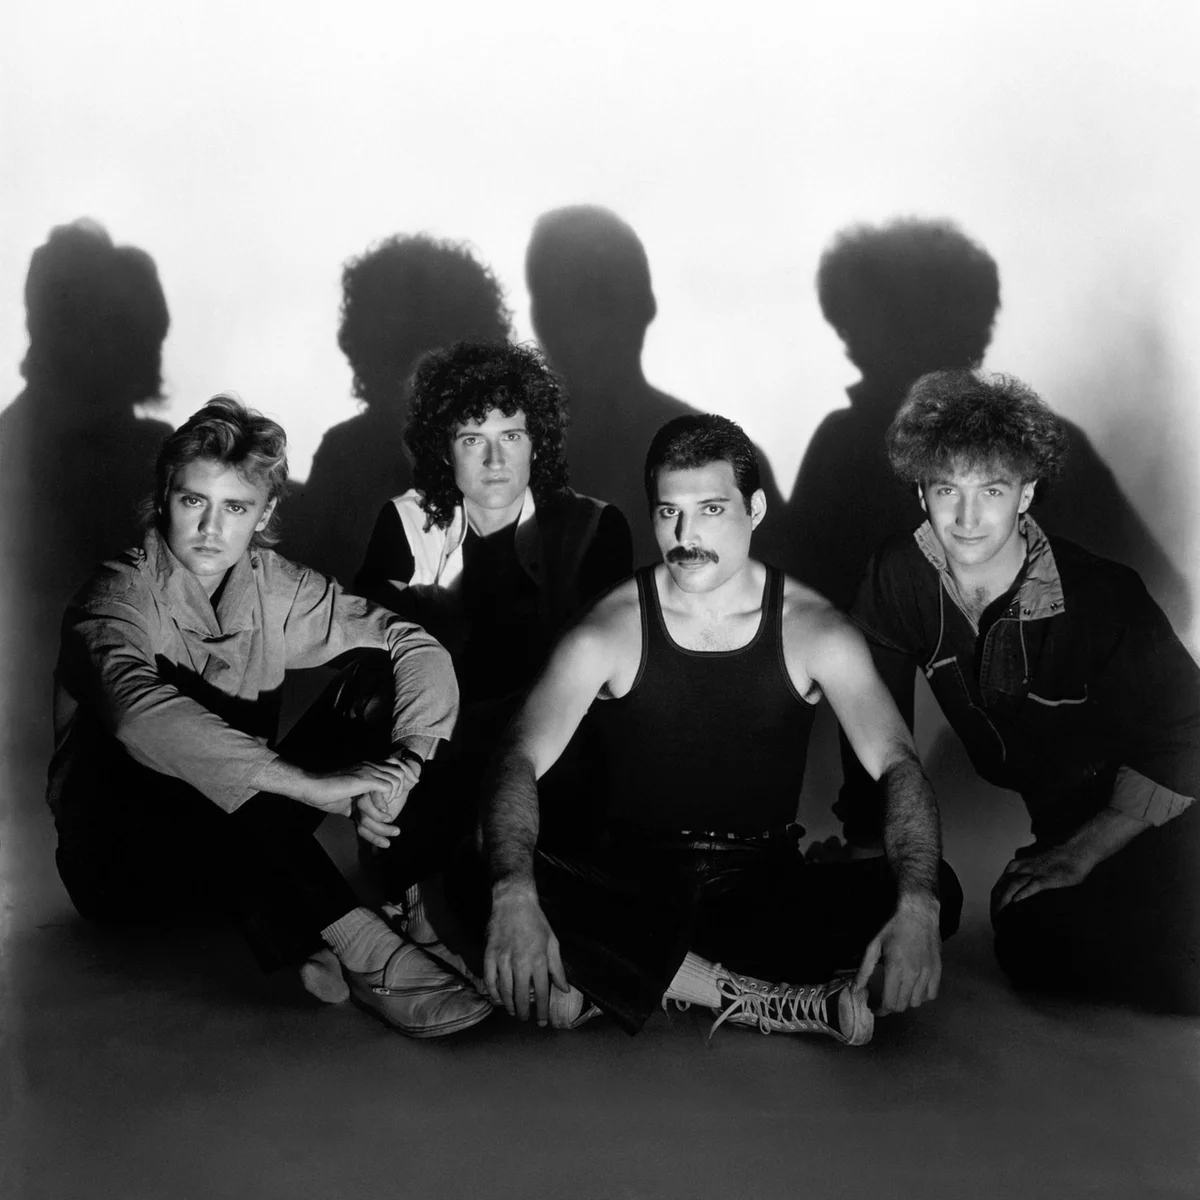 Cover of the album "The Works" by Queen